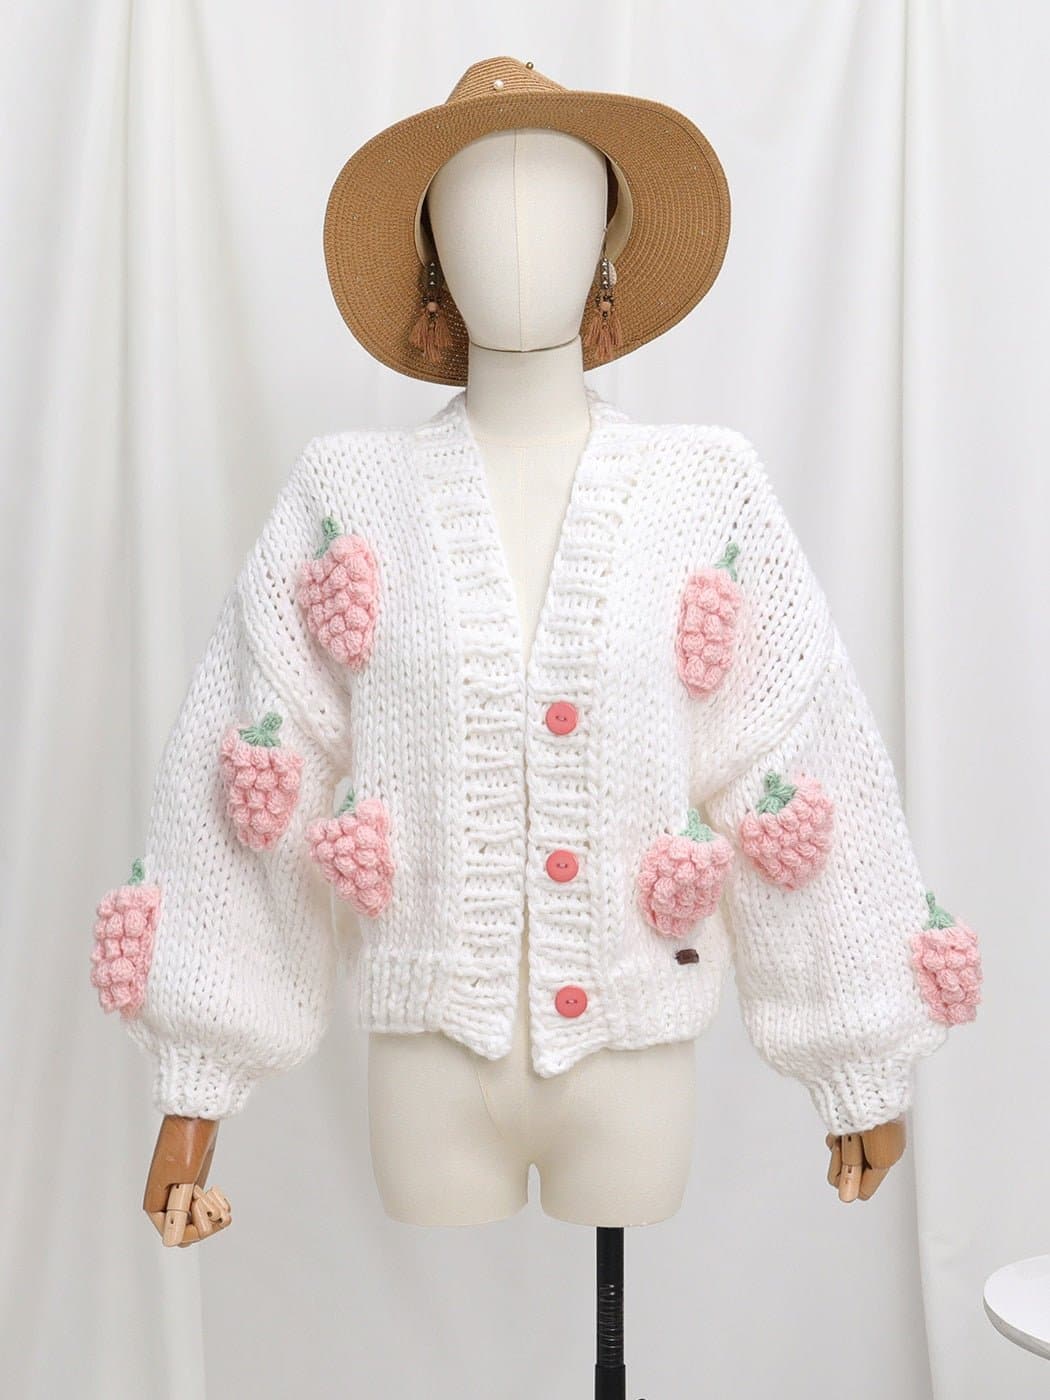 Floral Knitted Warm Loose Sweater - Wandering Woman